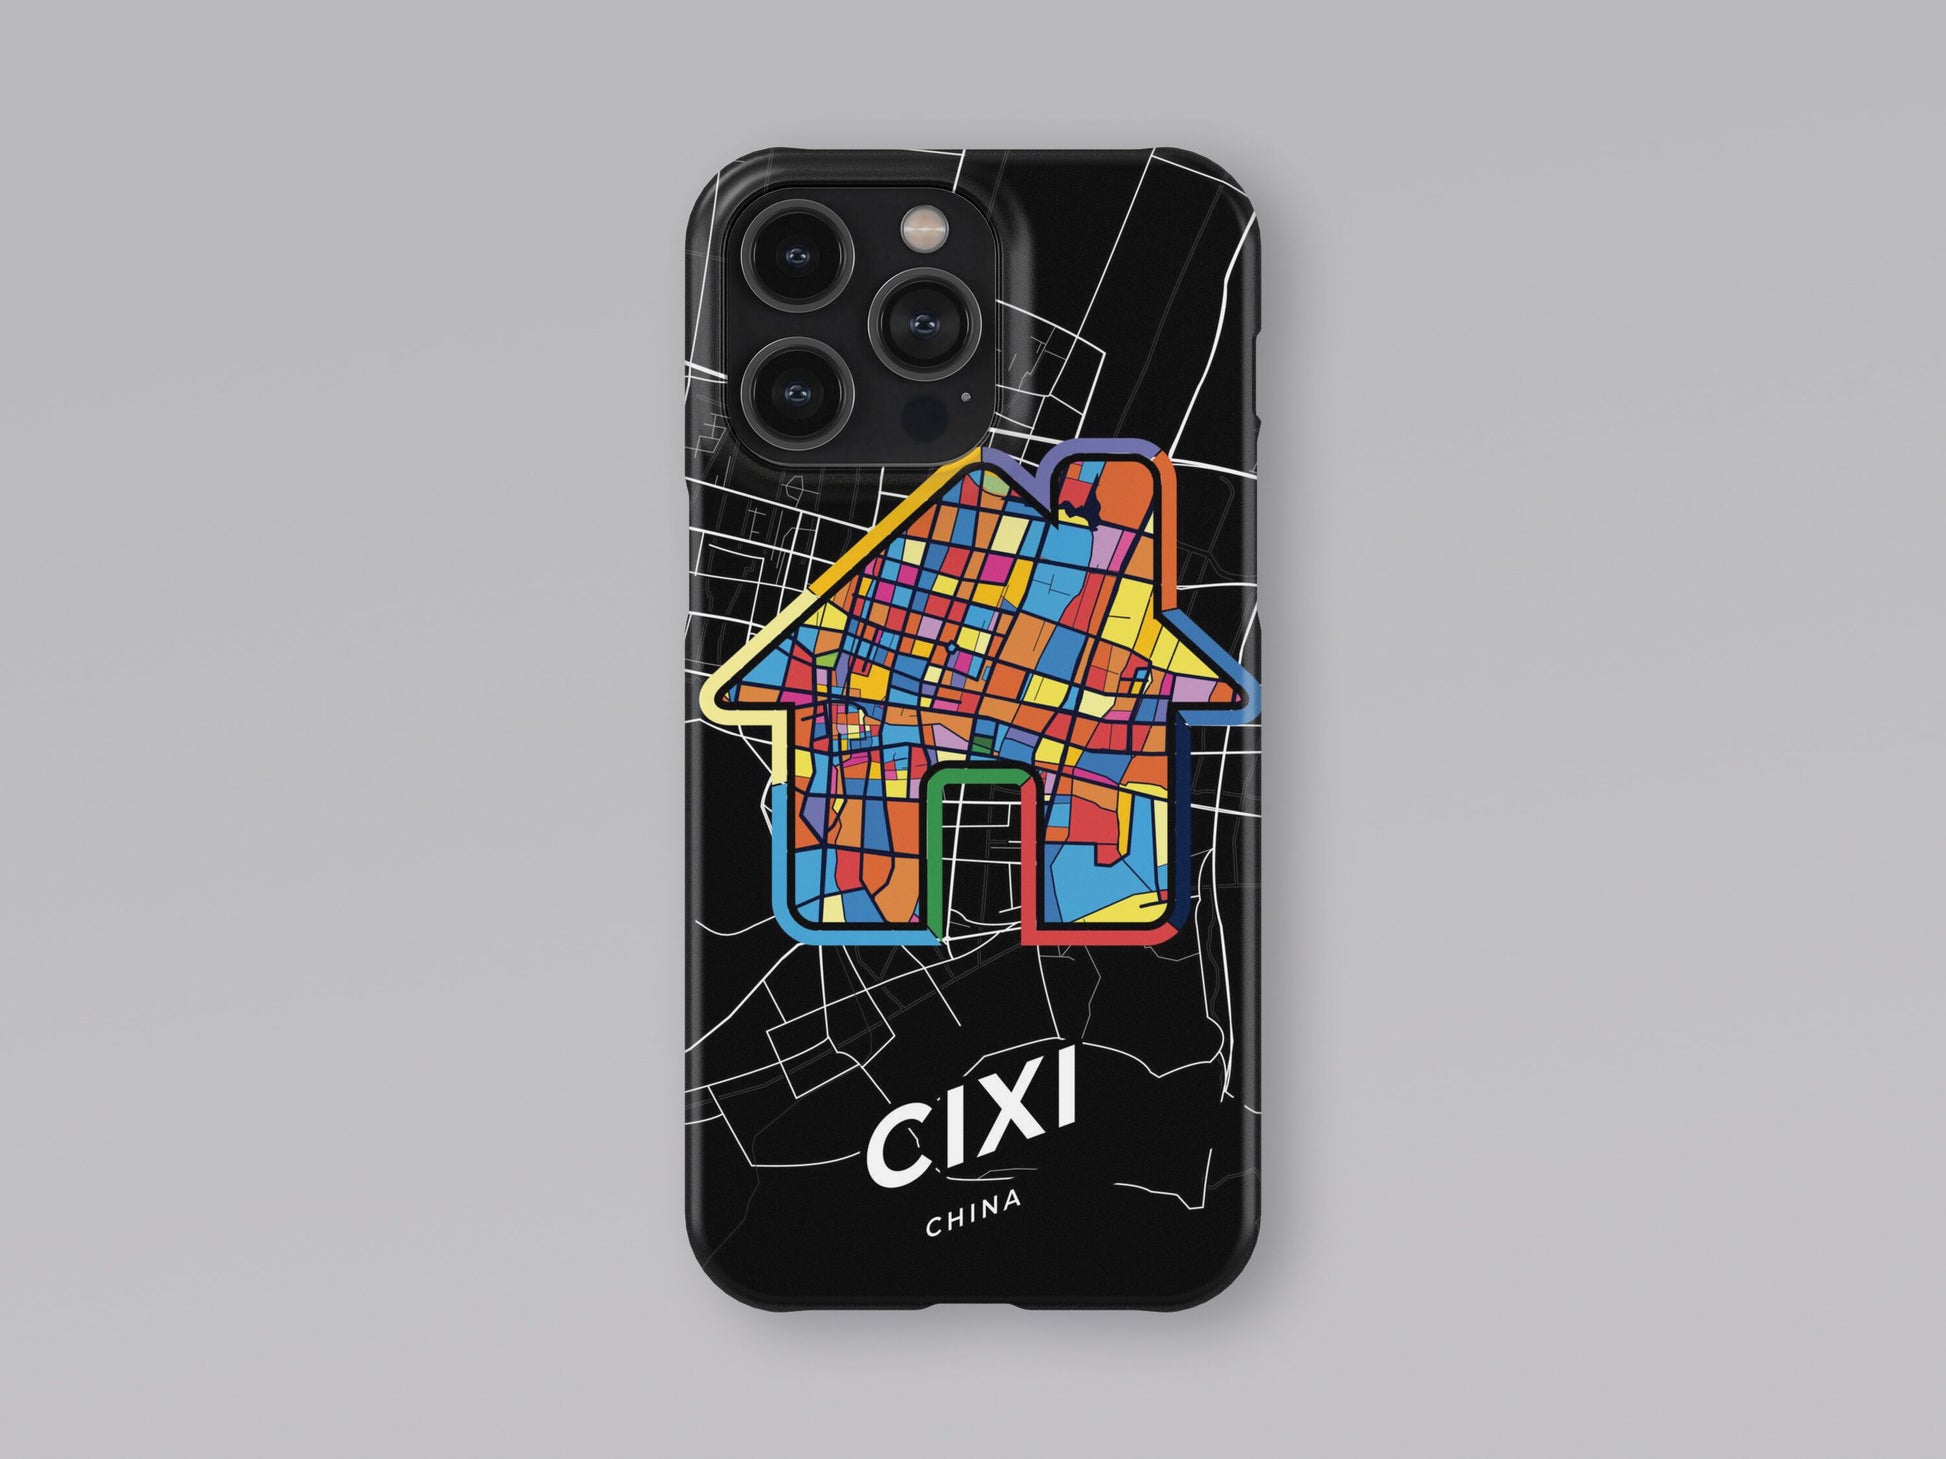 Cixi China slim phone case with colorful icon. Birthday, wedding or housewarming gift. Couple match cases. 3